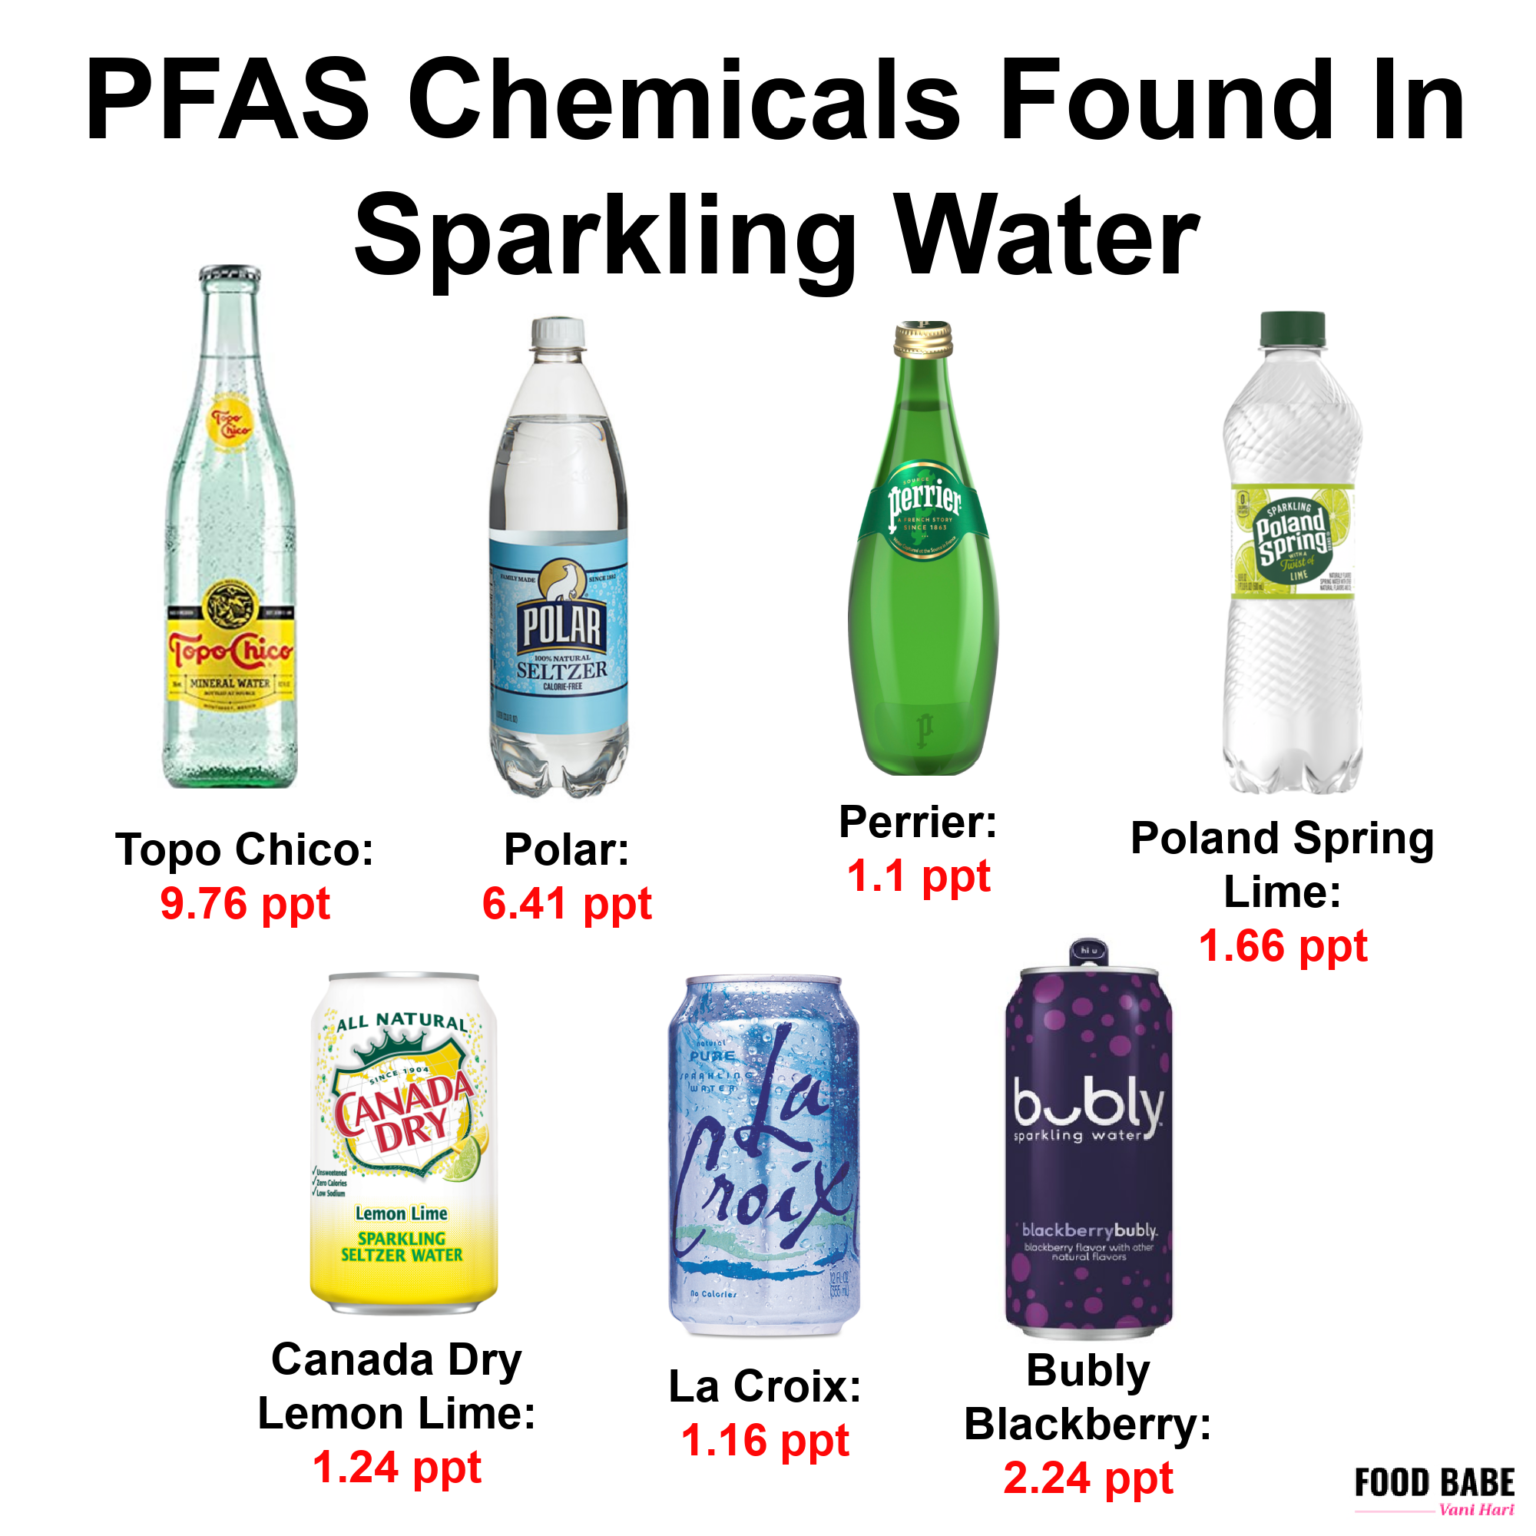 Sparkling Water Contaminated With Chemicals Linked To Eczema, Immune